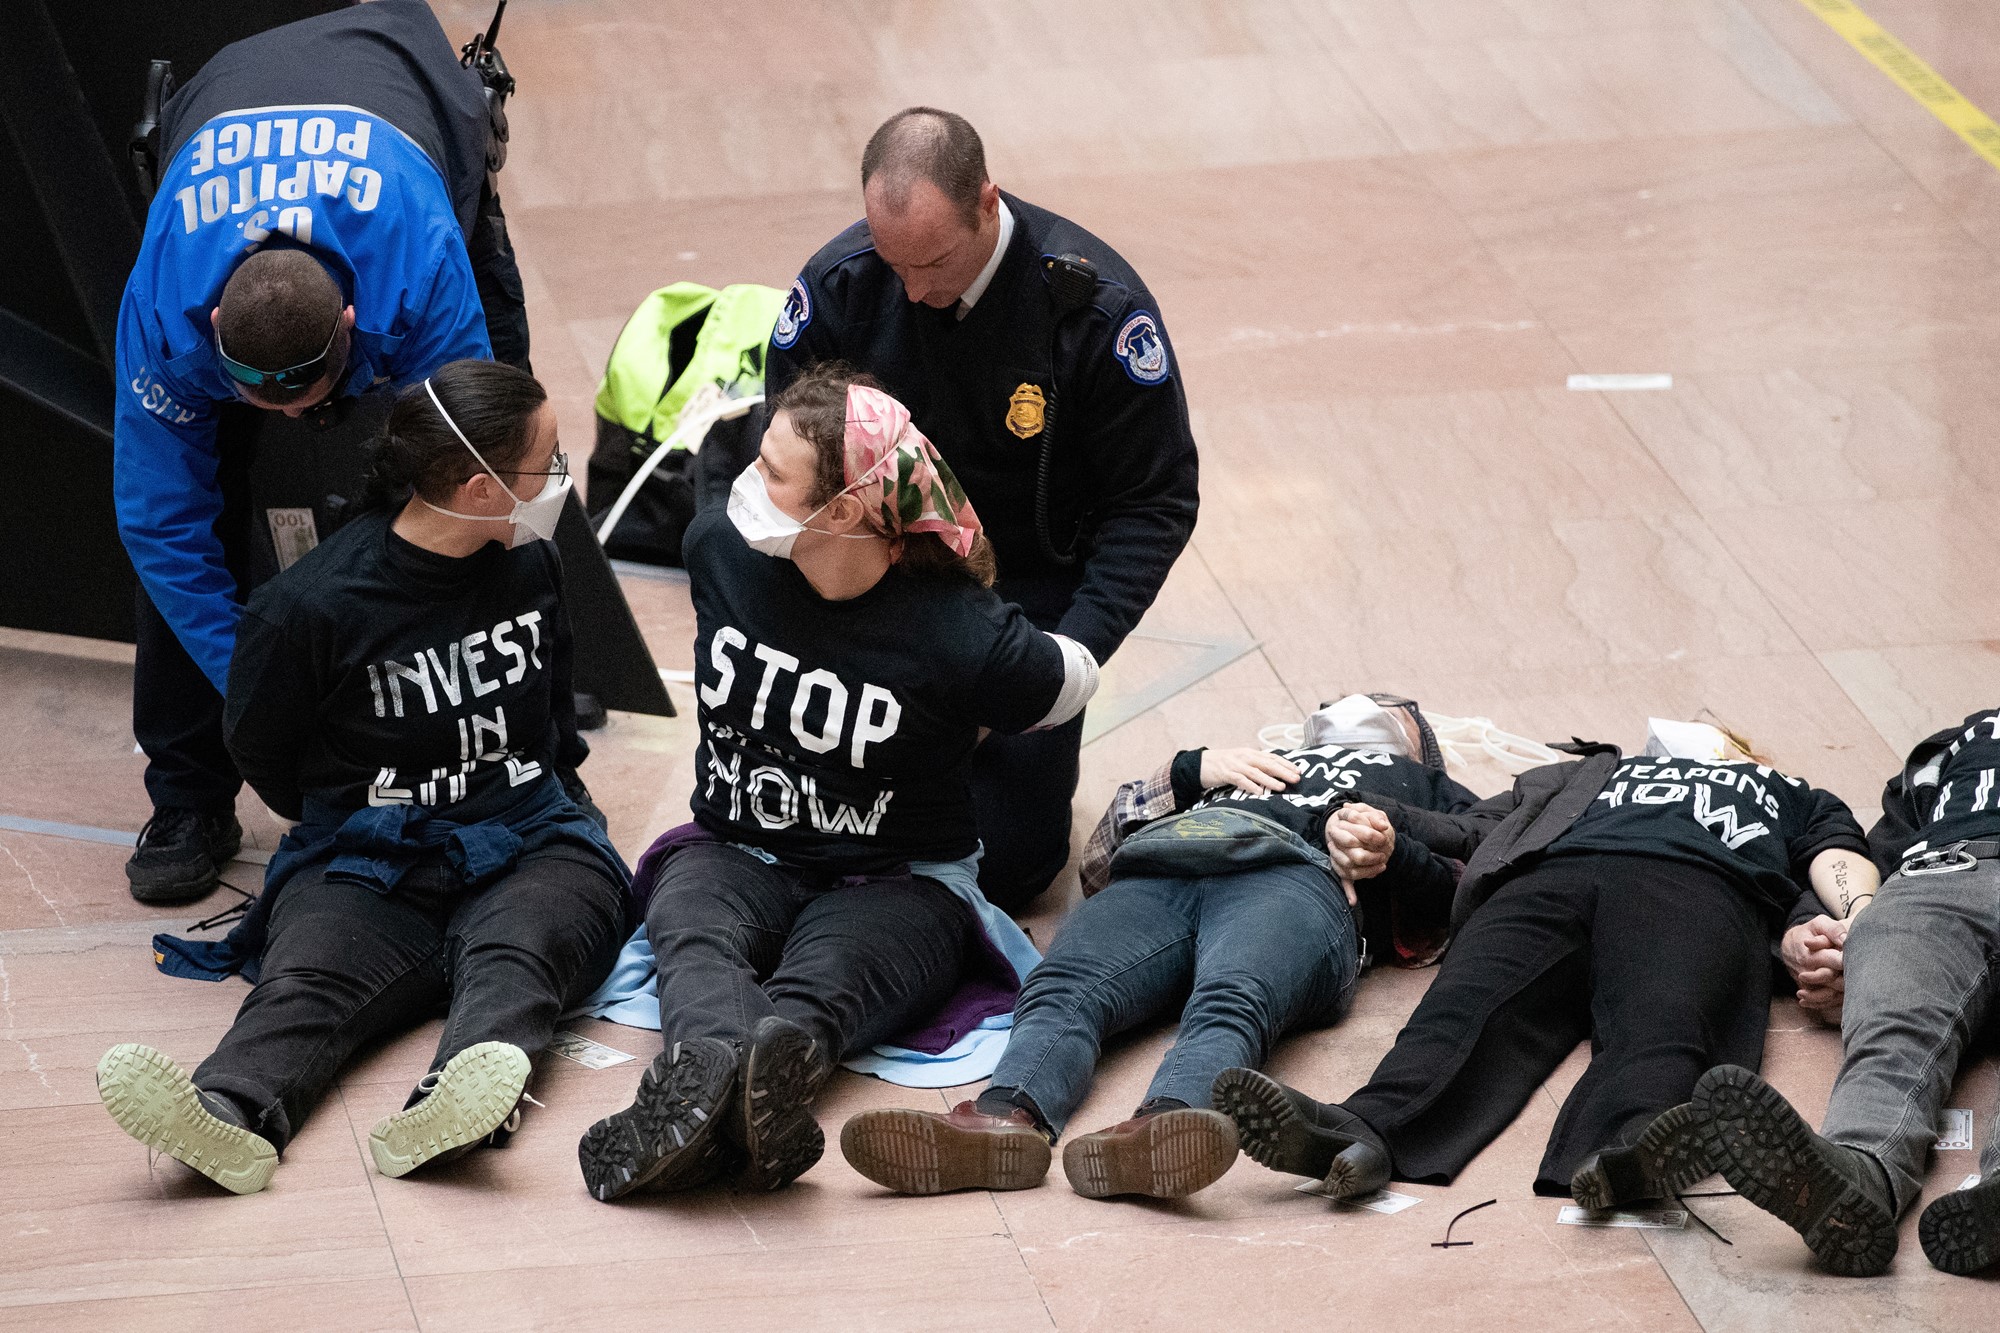 Protesters lie flat on the ground as police start to arrest some of them